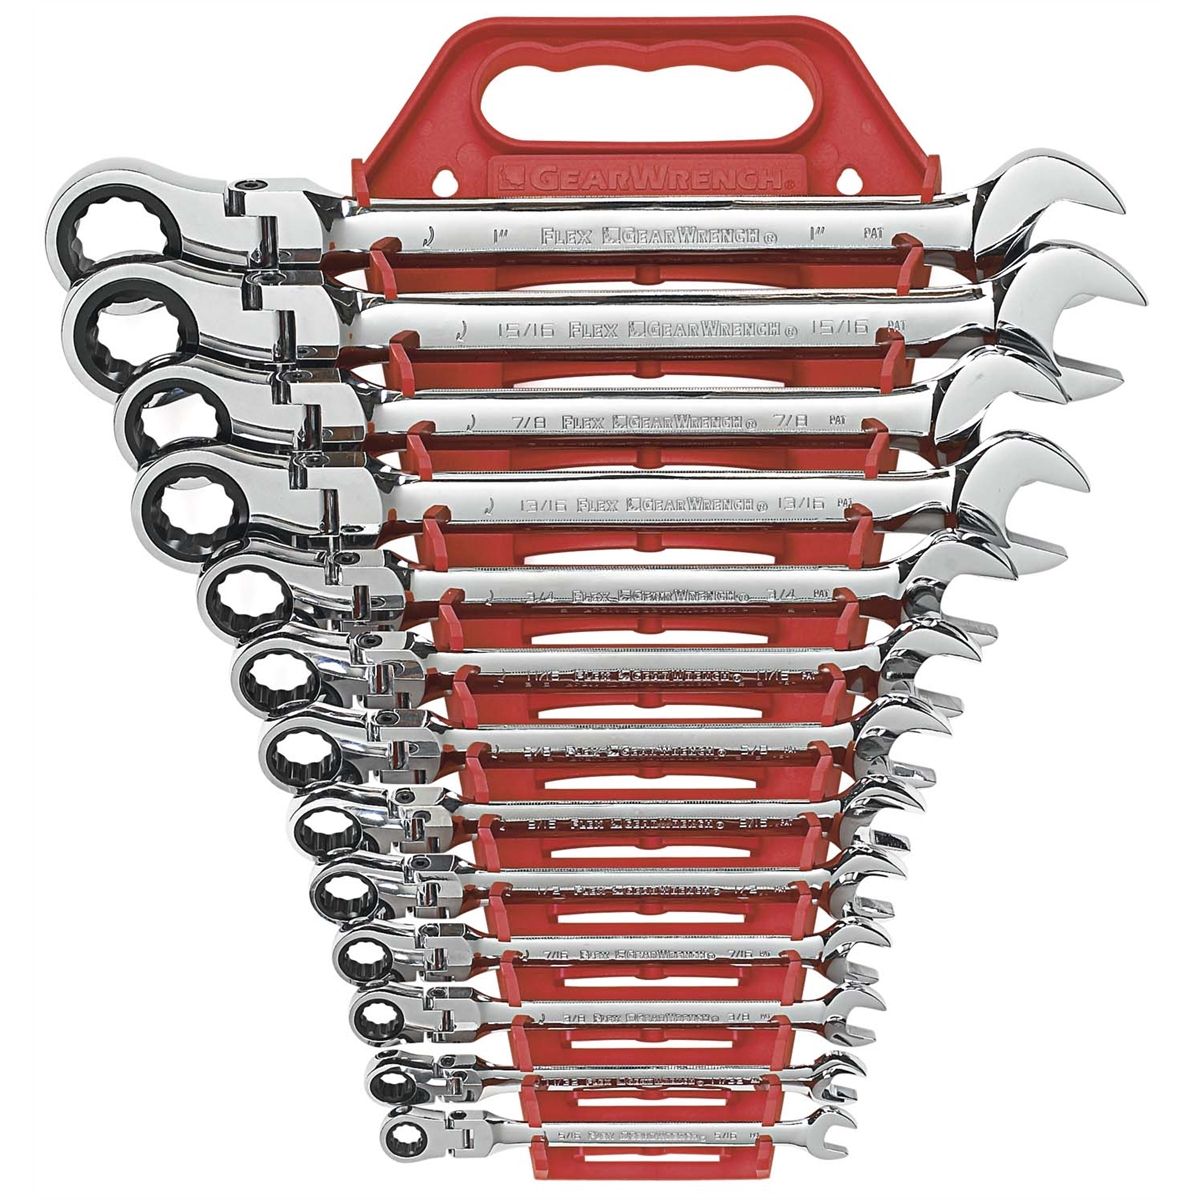 Gearwrench 9308 8 Piece SAE Gear Wrench Set